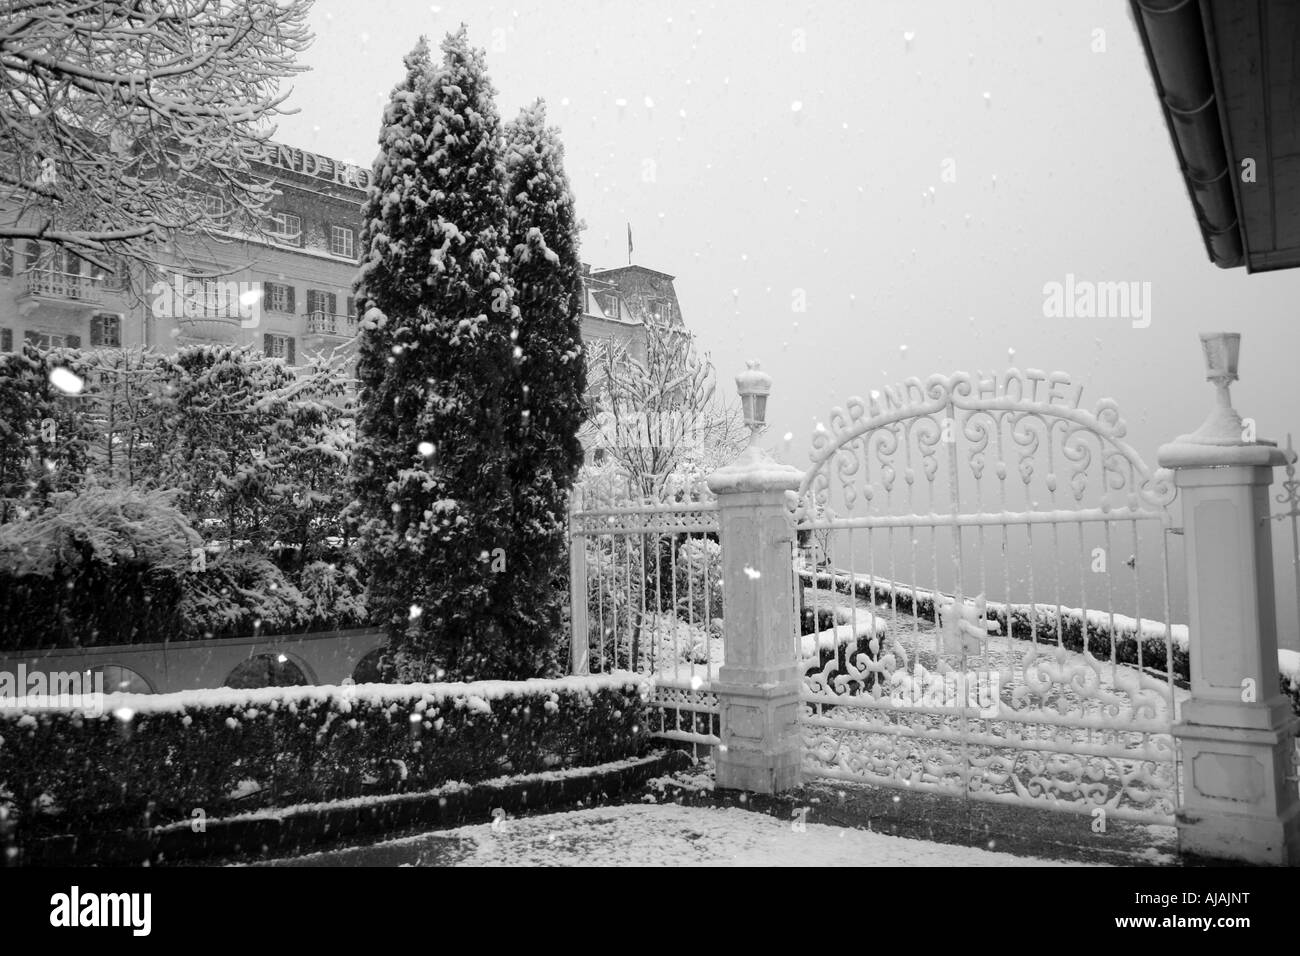 Snowy winter scene with wroght iron gates in pictures, Zell Am See ski resort, Austria. Stock Photo